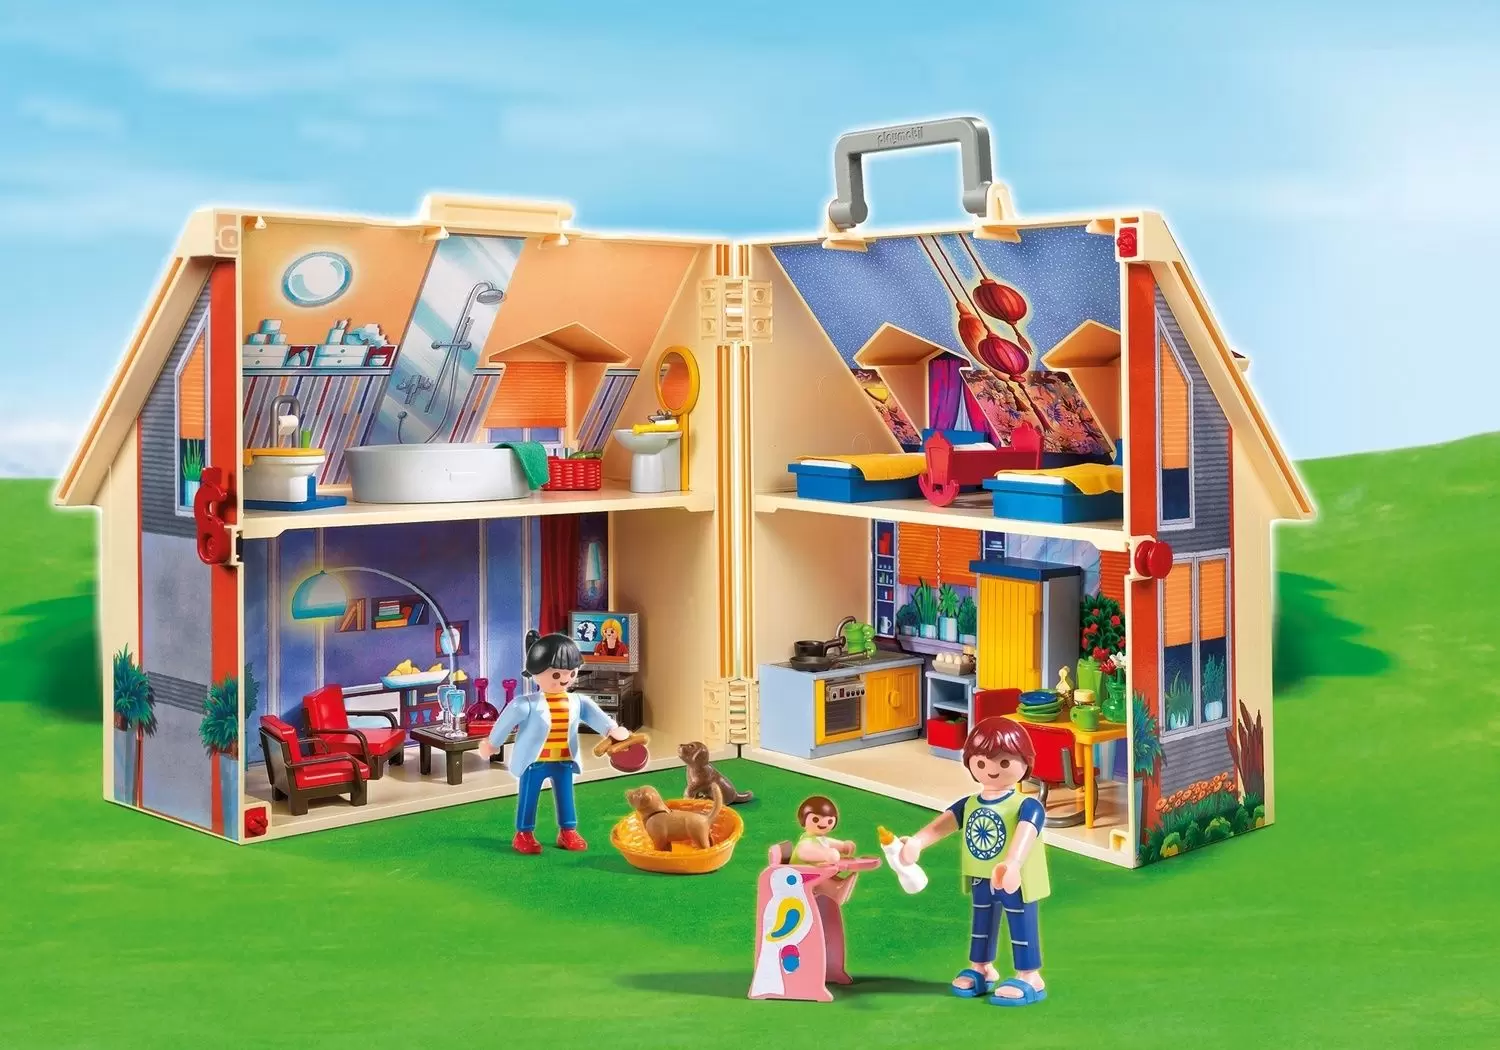 Playmobil Houses and Furniture - Take Along Modern Doll House